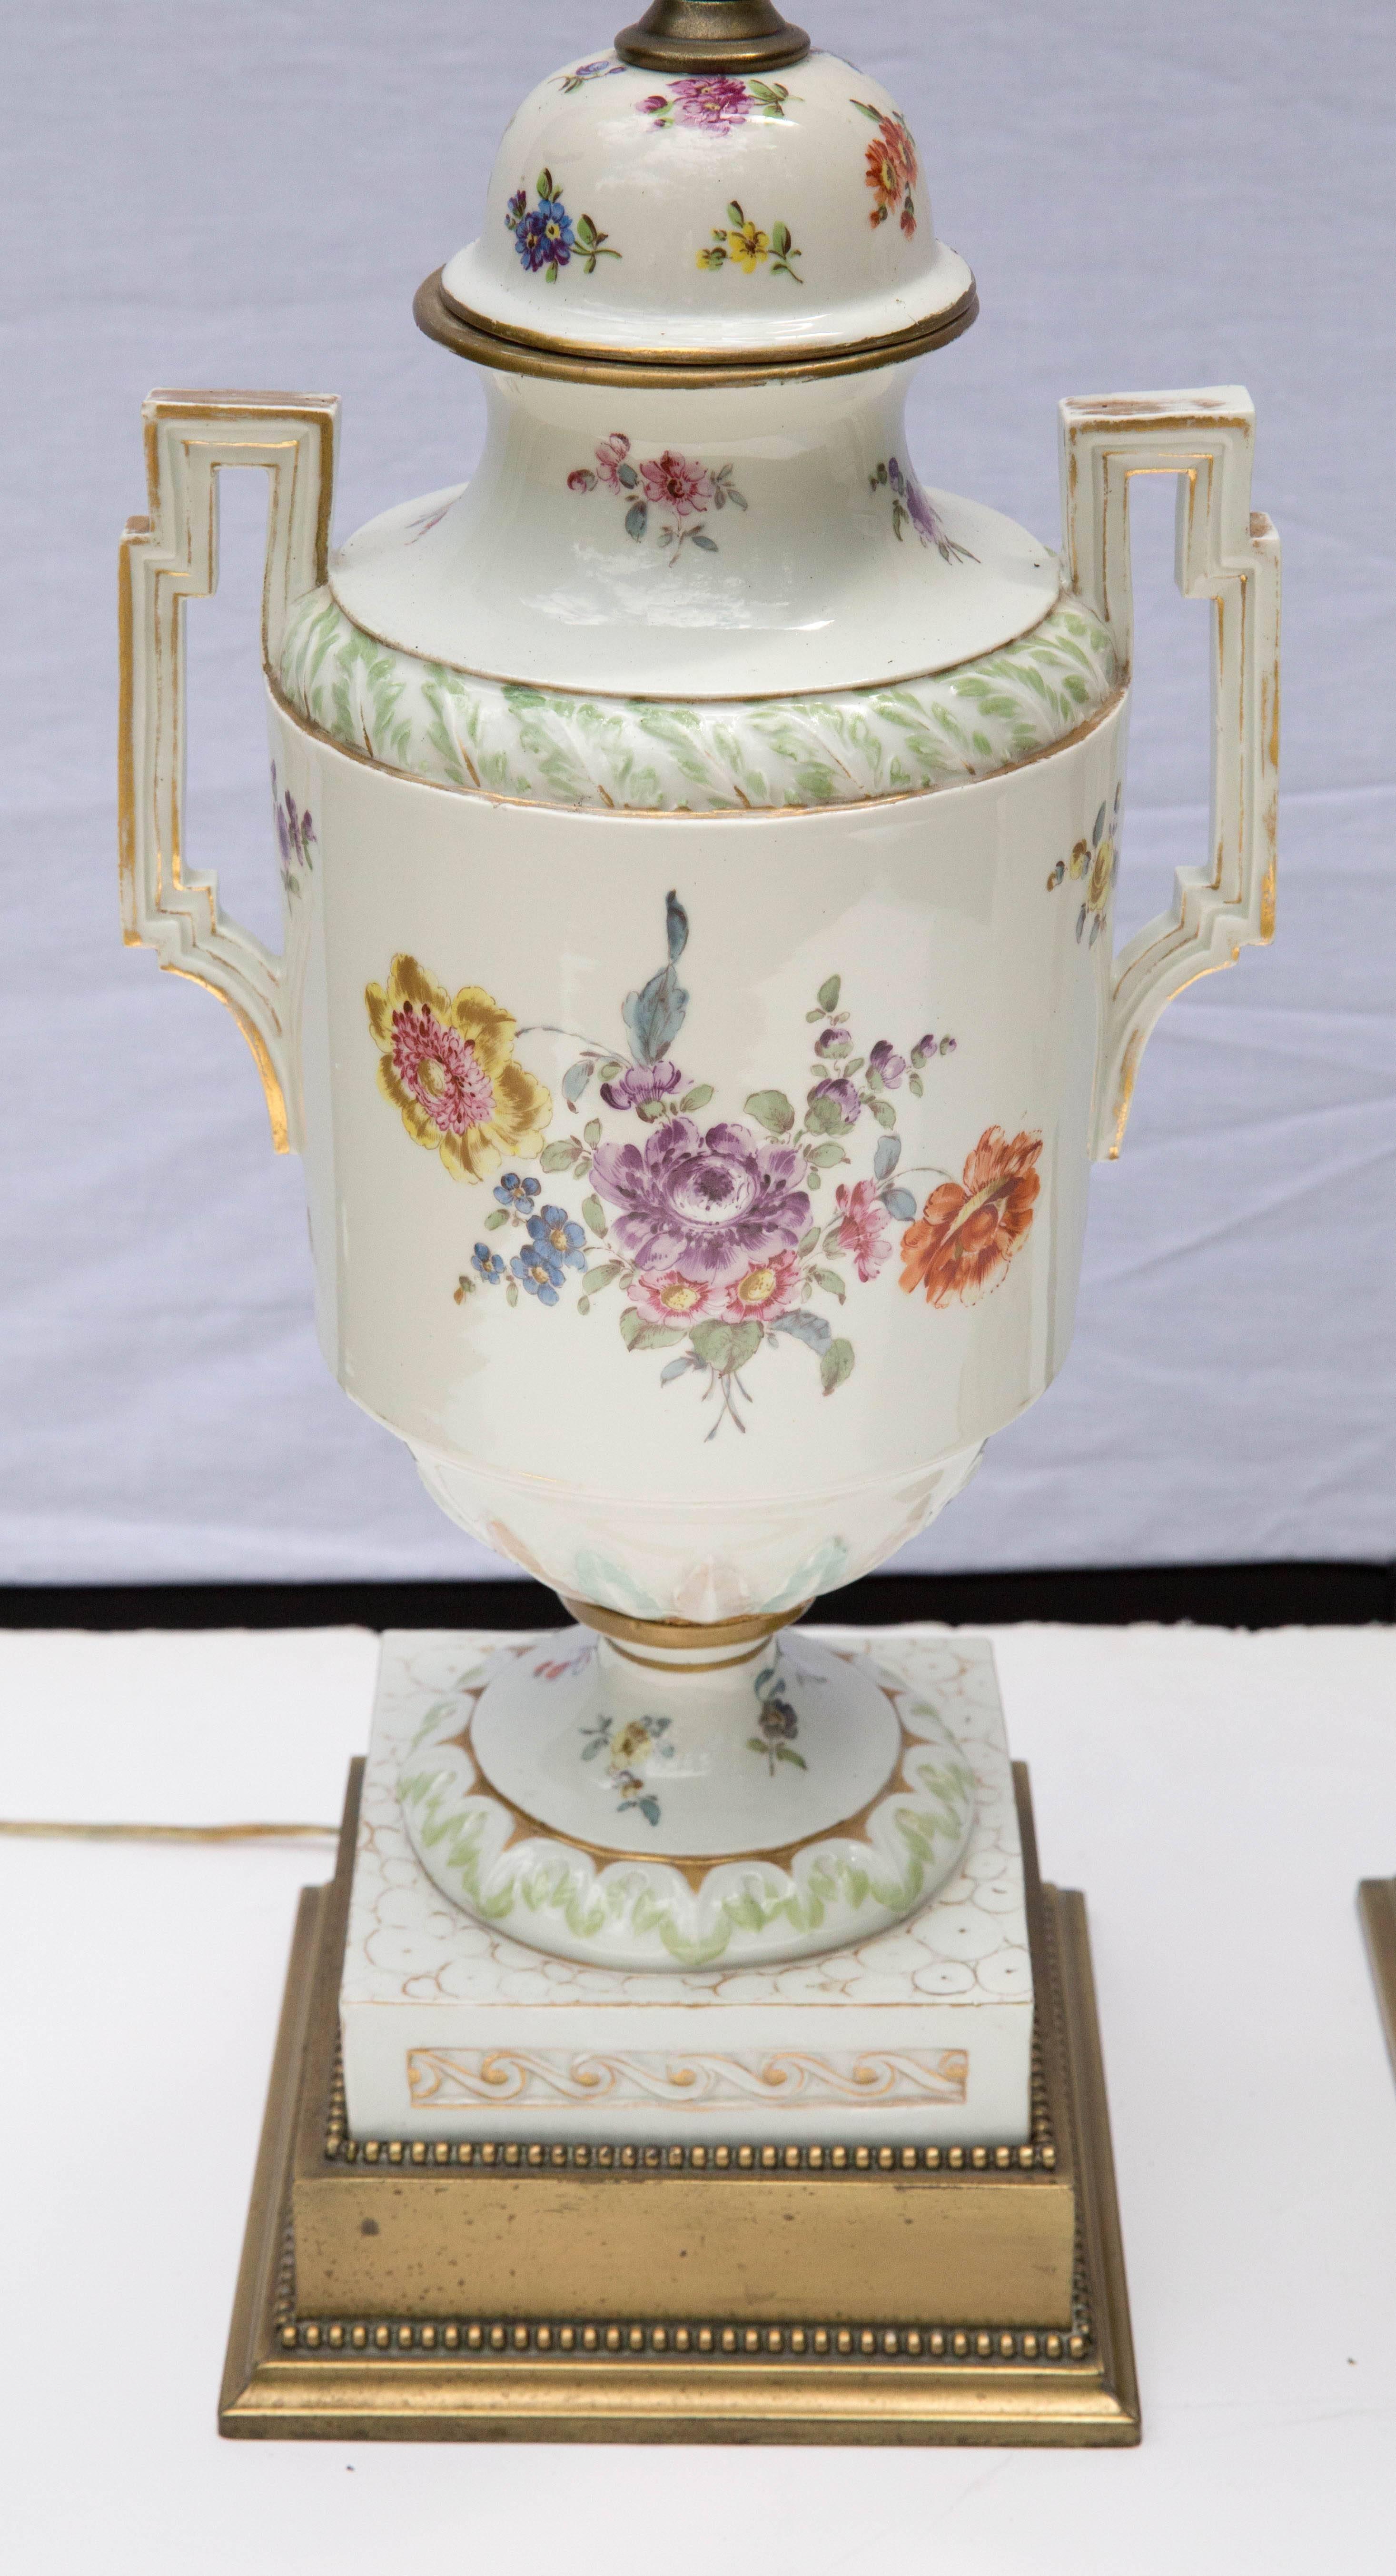 A pair of mid-19th century porcelain dome-lidded urns, hand decorated in the neoclassical manner, drilled and mounted on brass bases, as lamps.